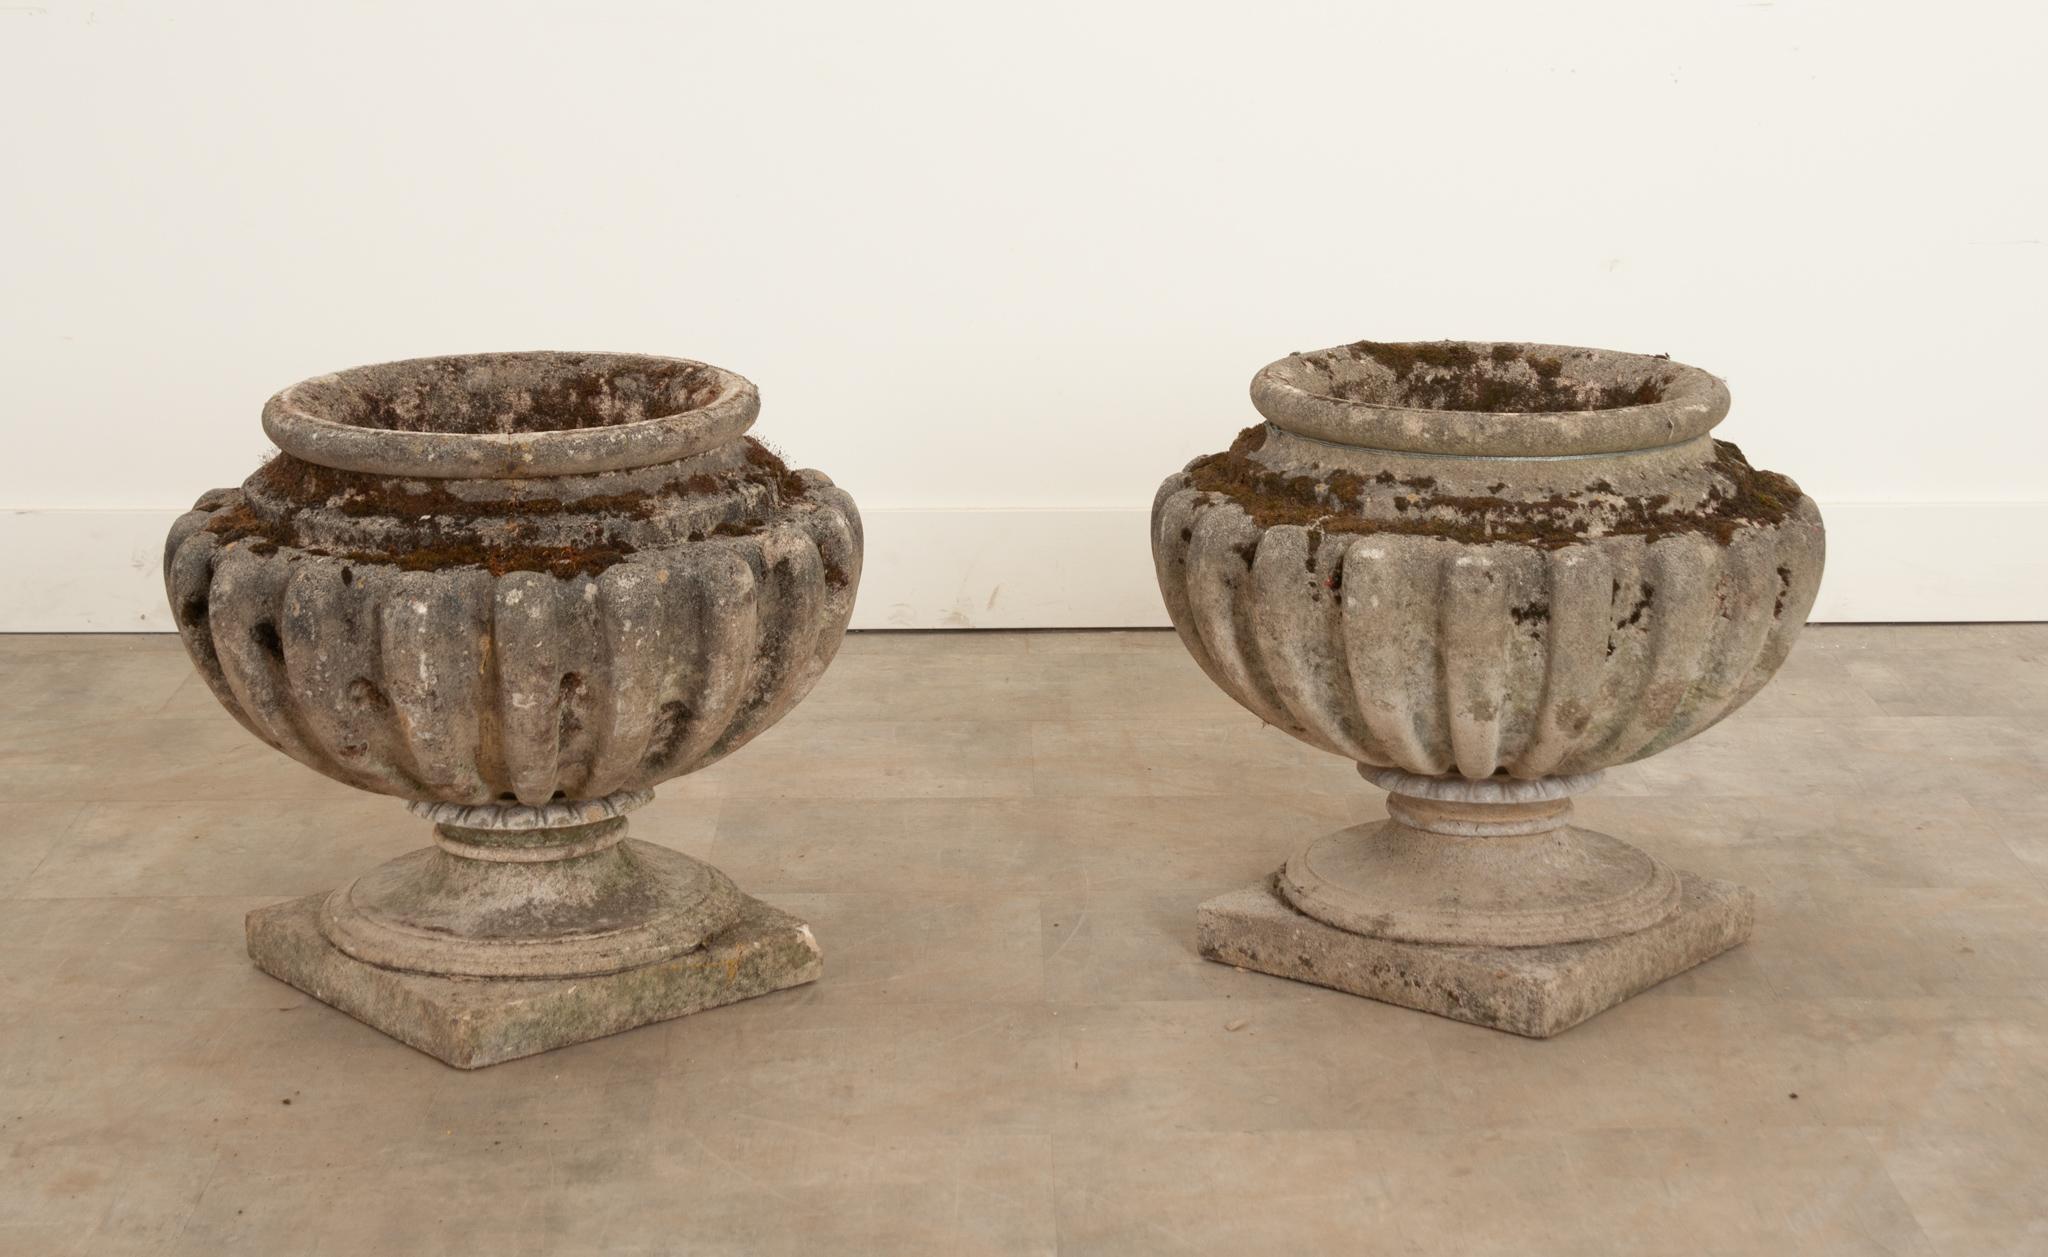 Crafted in England during the 19th century, this pair of stone planters are sure to add the perfect touch of antique charm to your outdoor space. The basin opening measurements are 11-½”“diameter and 10“ deep. The base measures 13-¾” square.